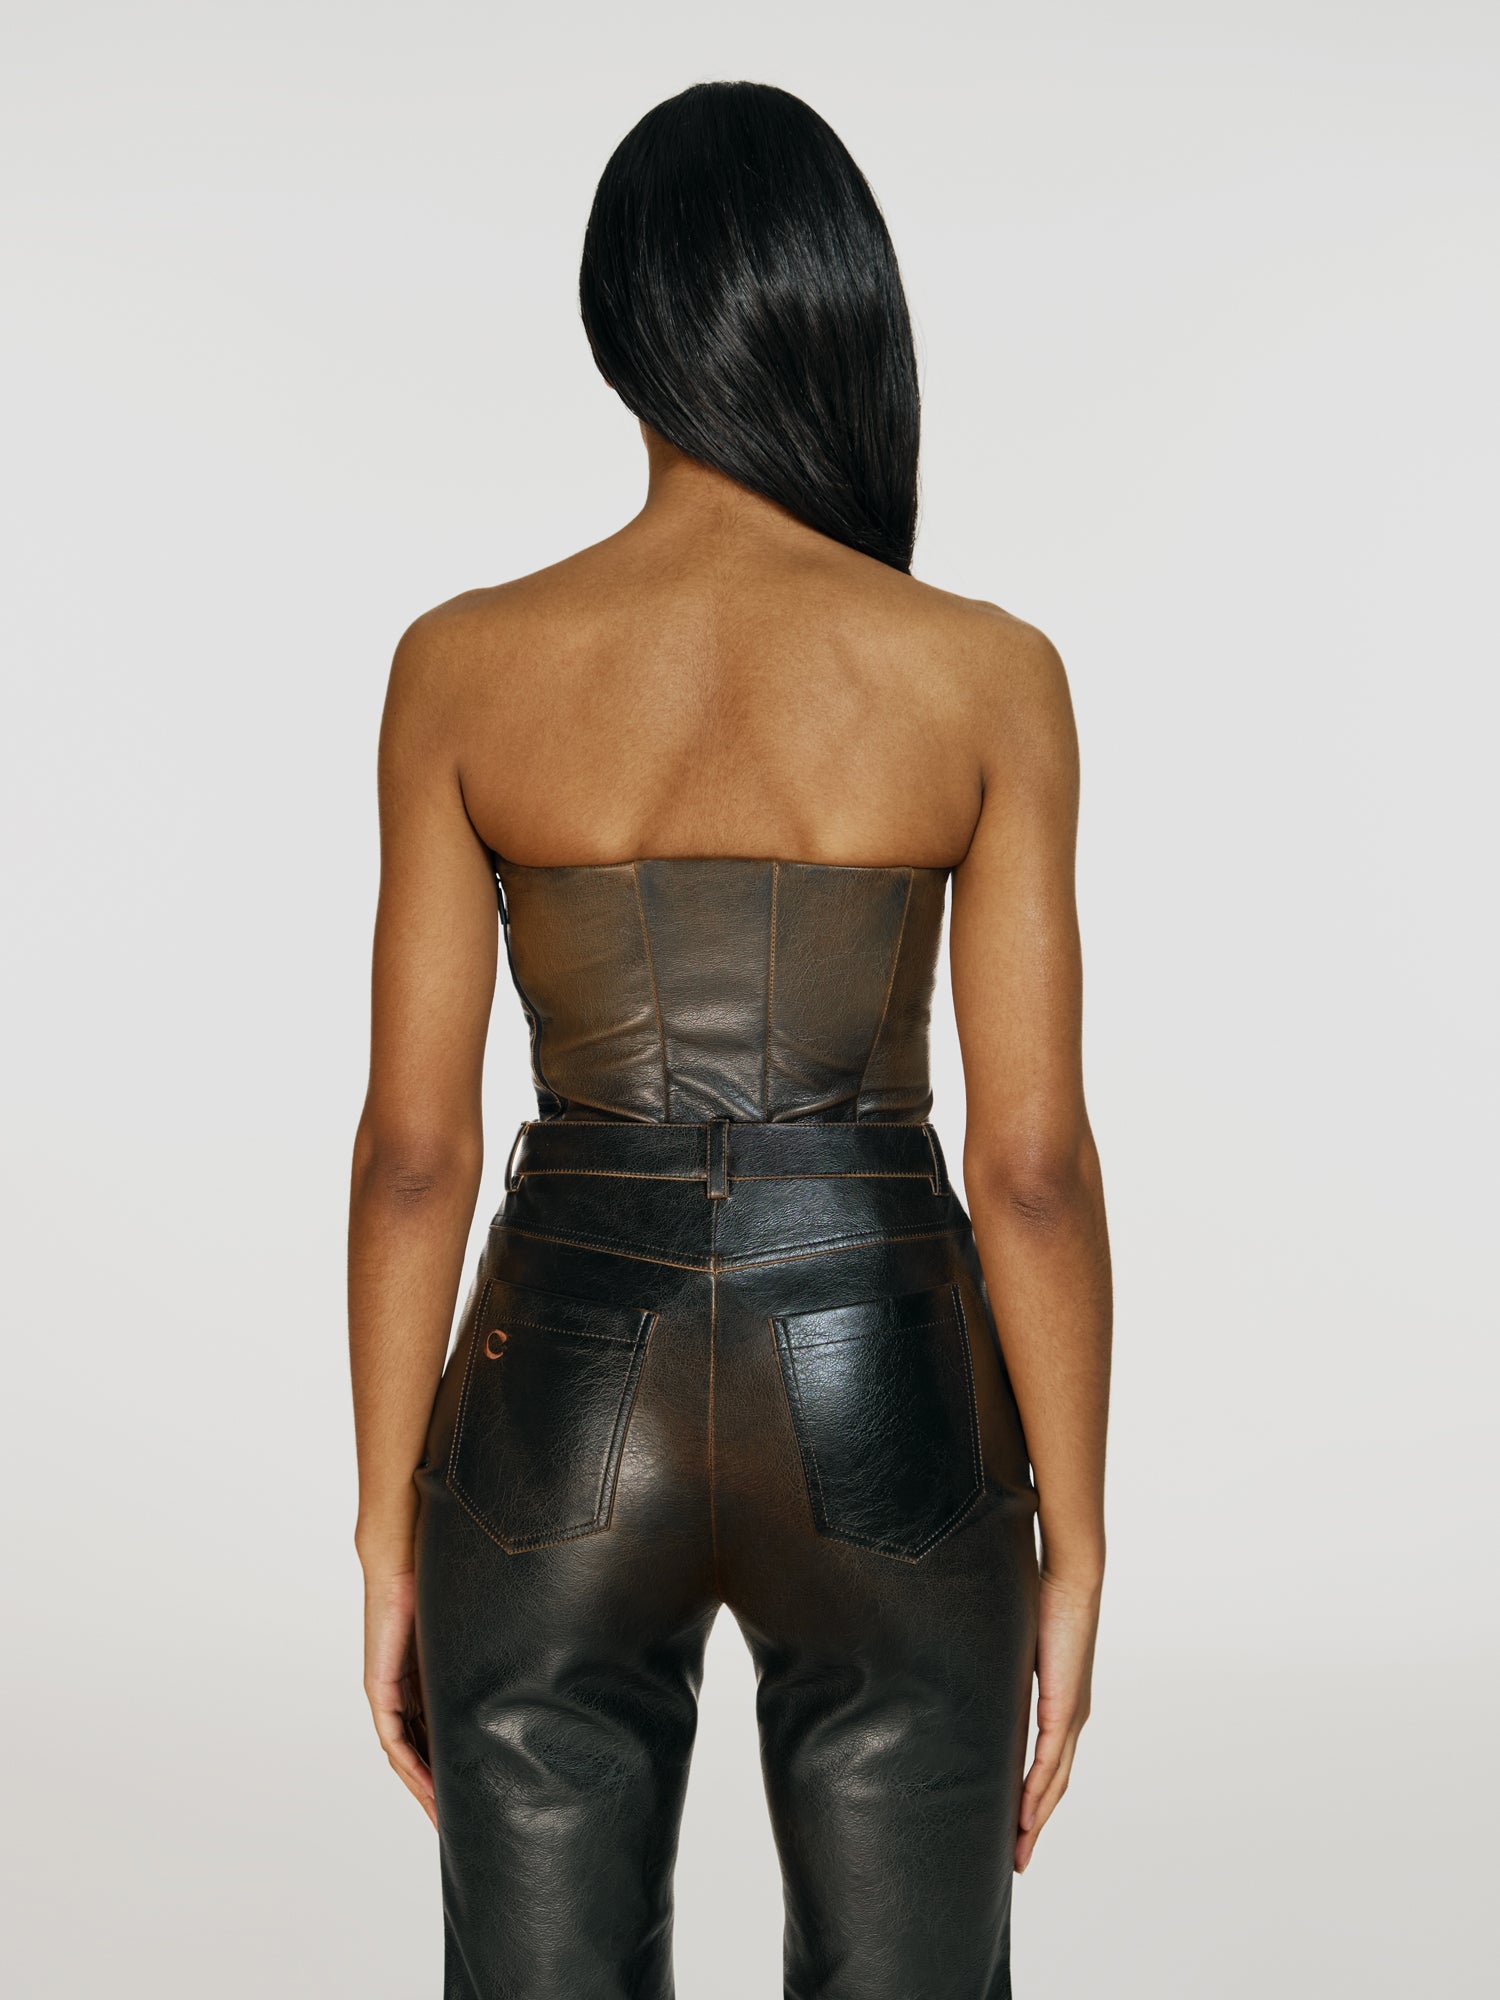 Cowboy shot of a girl facing back in a brown vegan leather tube top and brown vegan leather high rise pants with straight leg